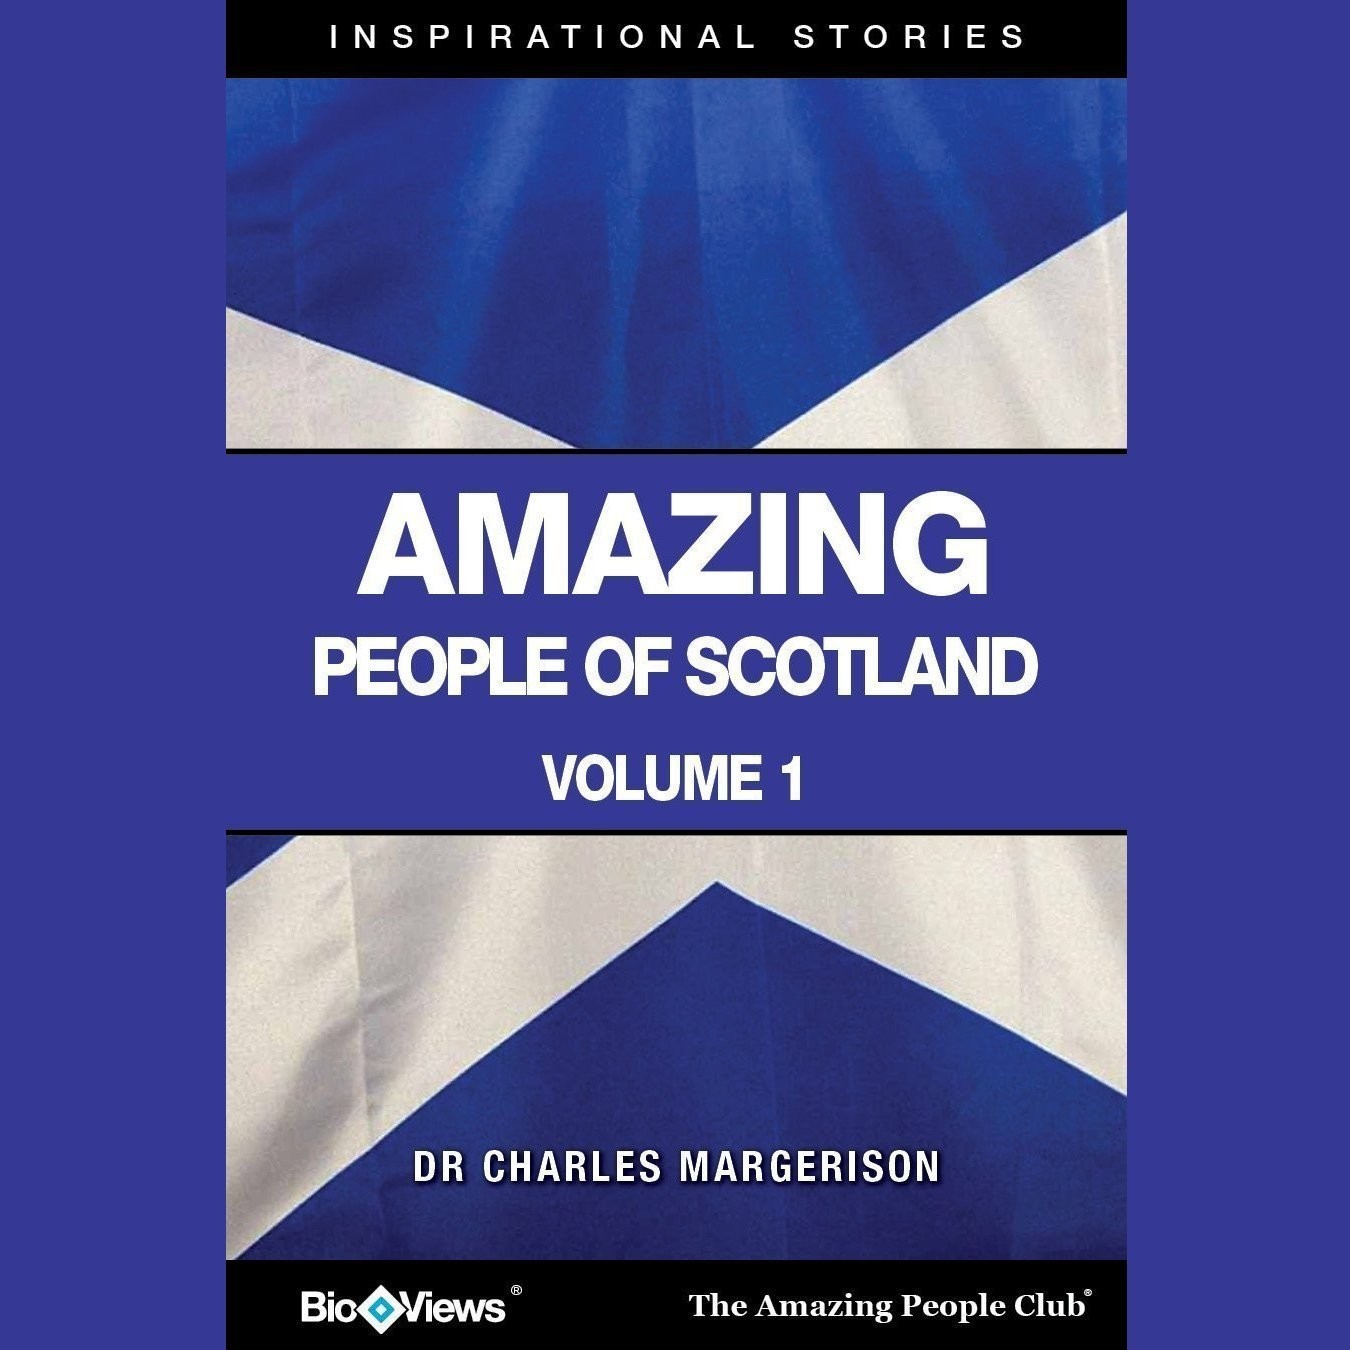 Amazing People of Scotland, Vol. 1: Inspirational Stories Audiobook, by Charles Margerison